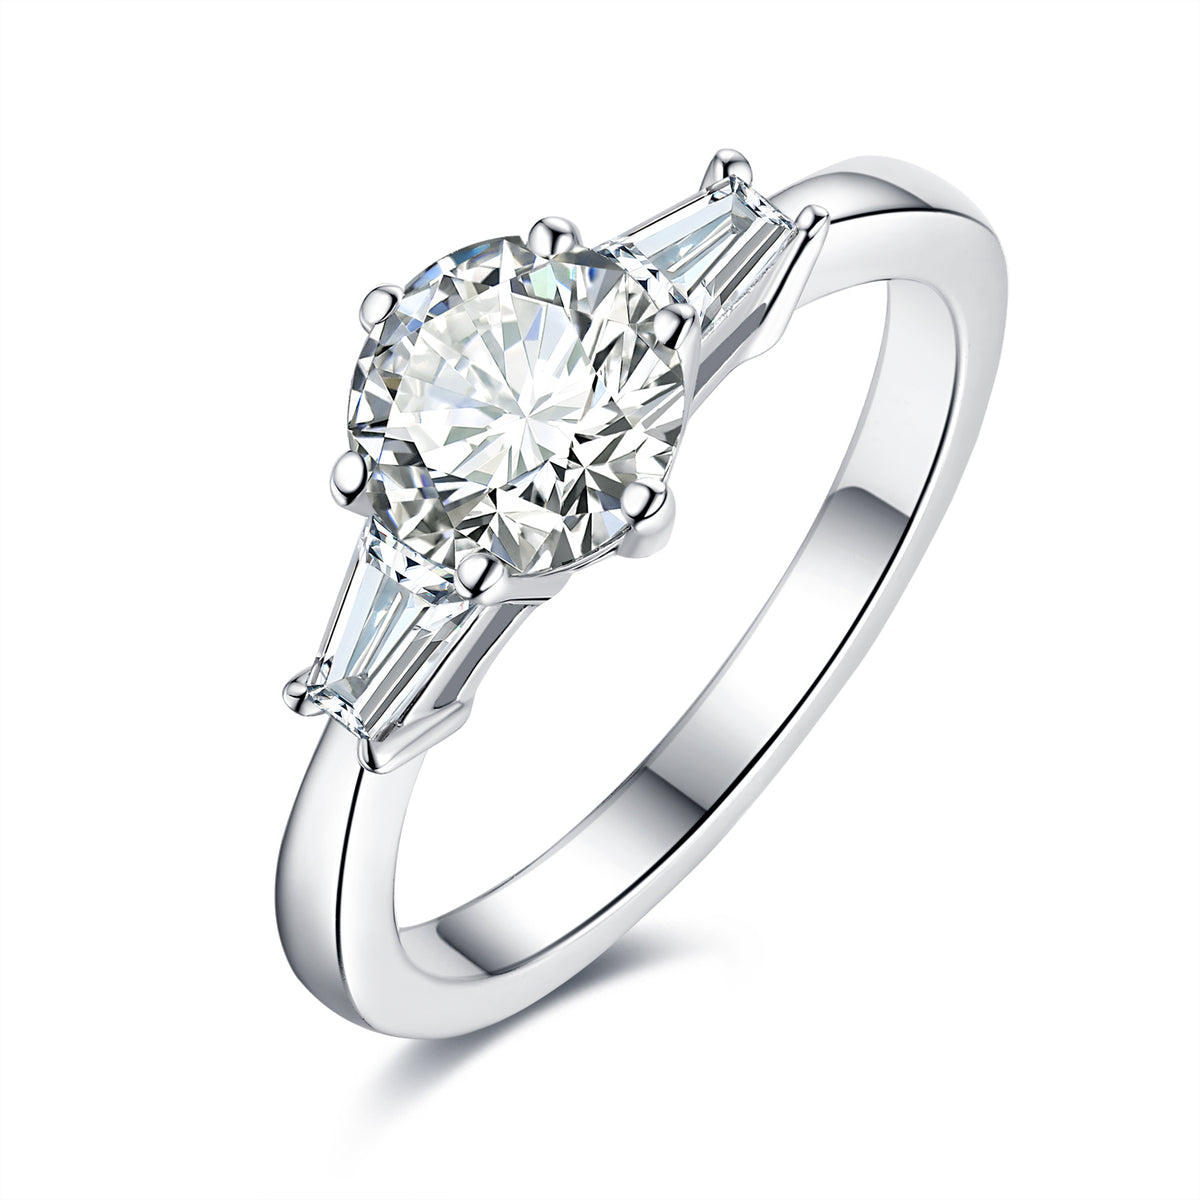 【02LIVE # link 12 - BUY 1 GET 1 free ring】 S925 Moissanite Both sides Rings 1/2Carat RM1028